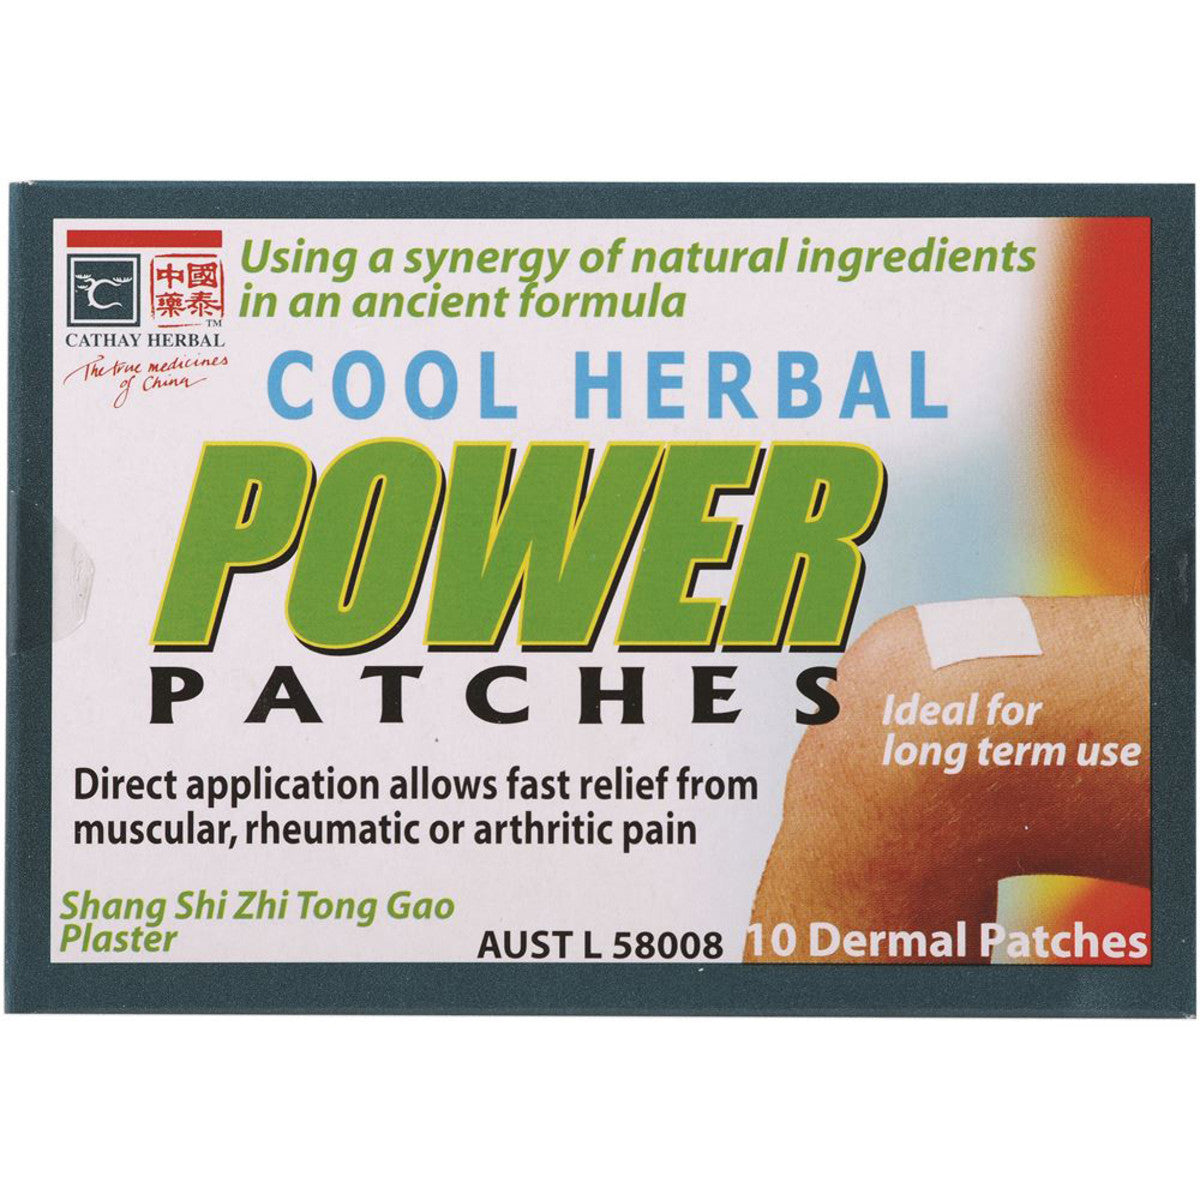 Cathay Herbal - Cool Herbal Power Patches